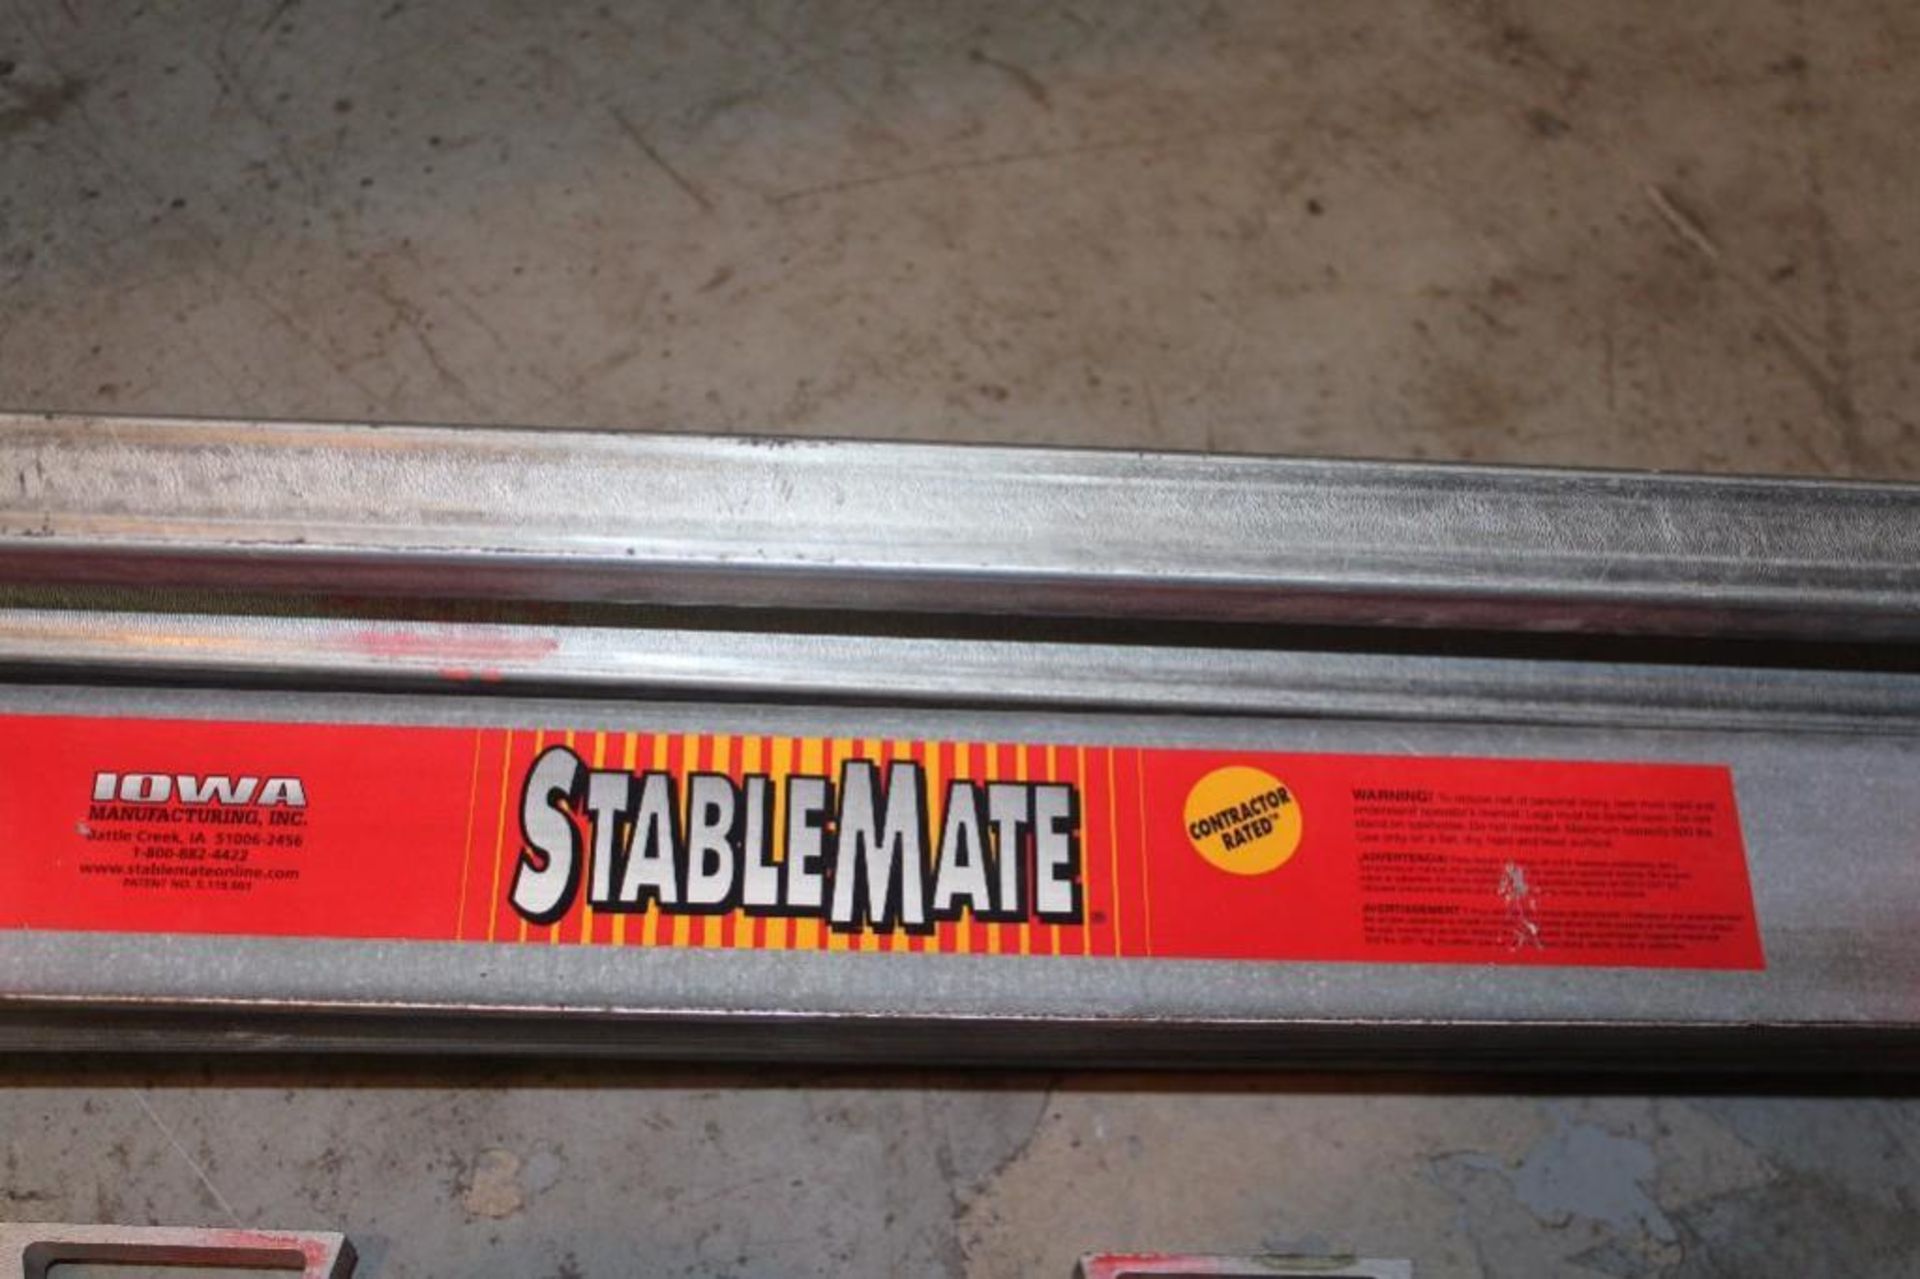 StableMatemiter saw stand - Image 2 of 2